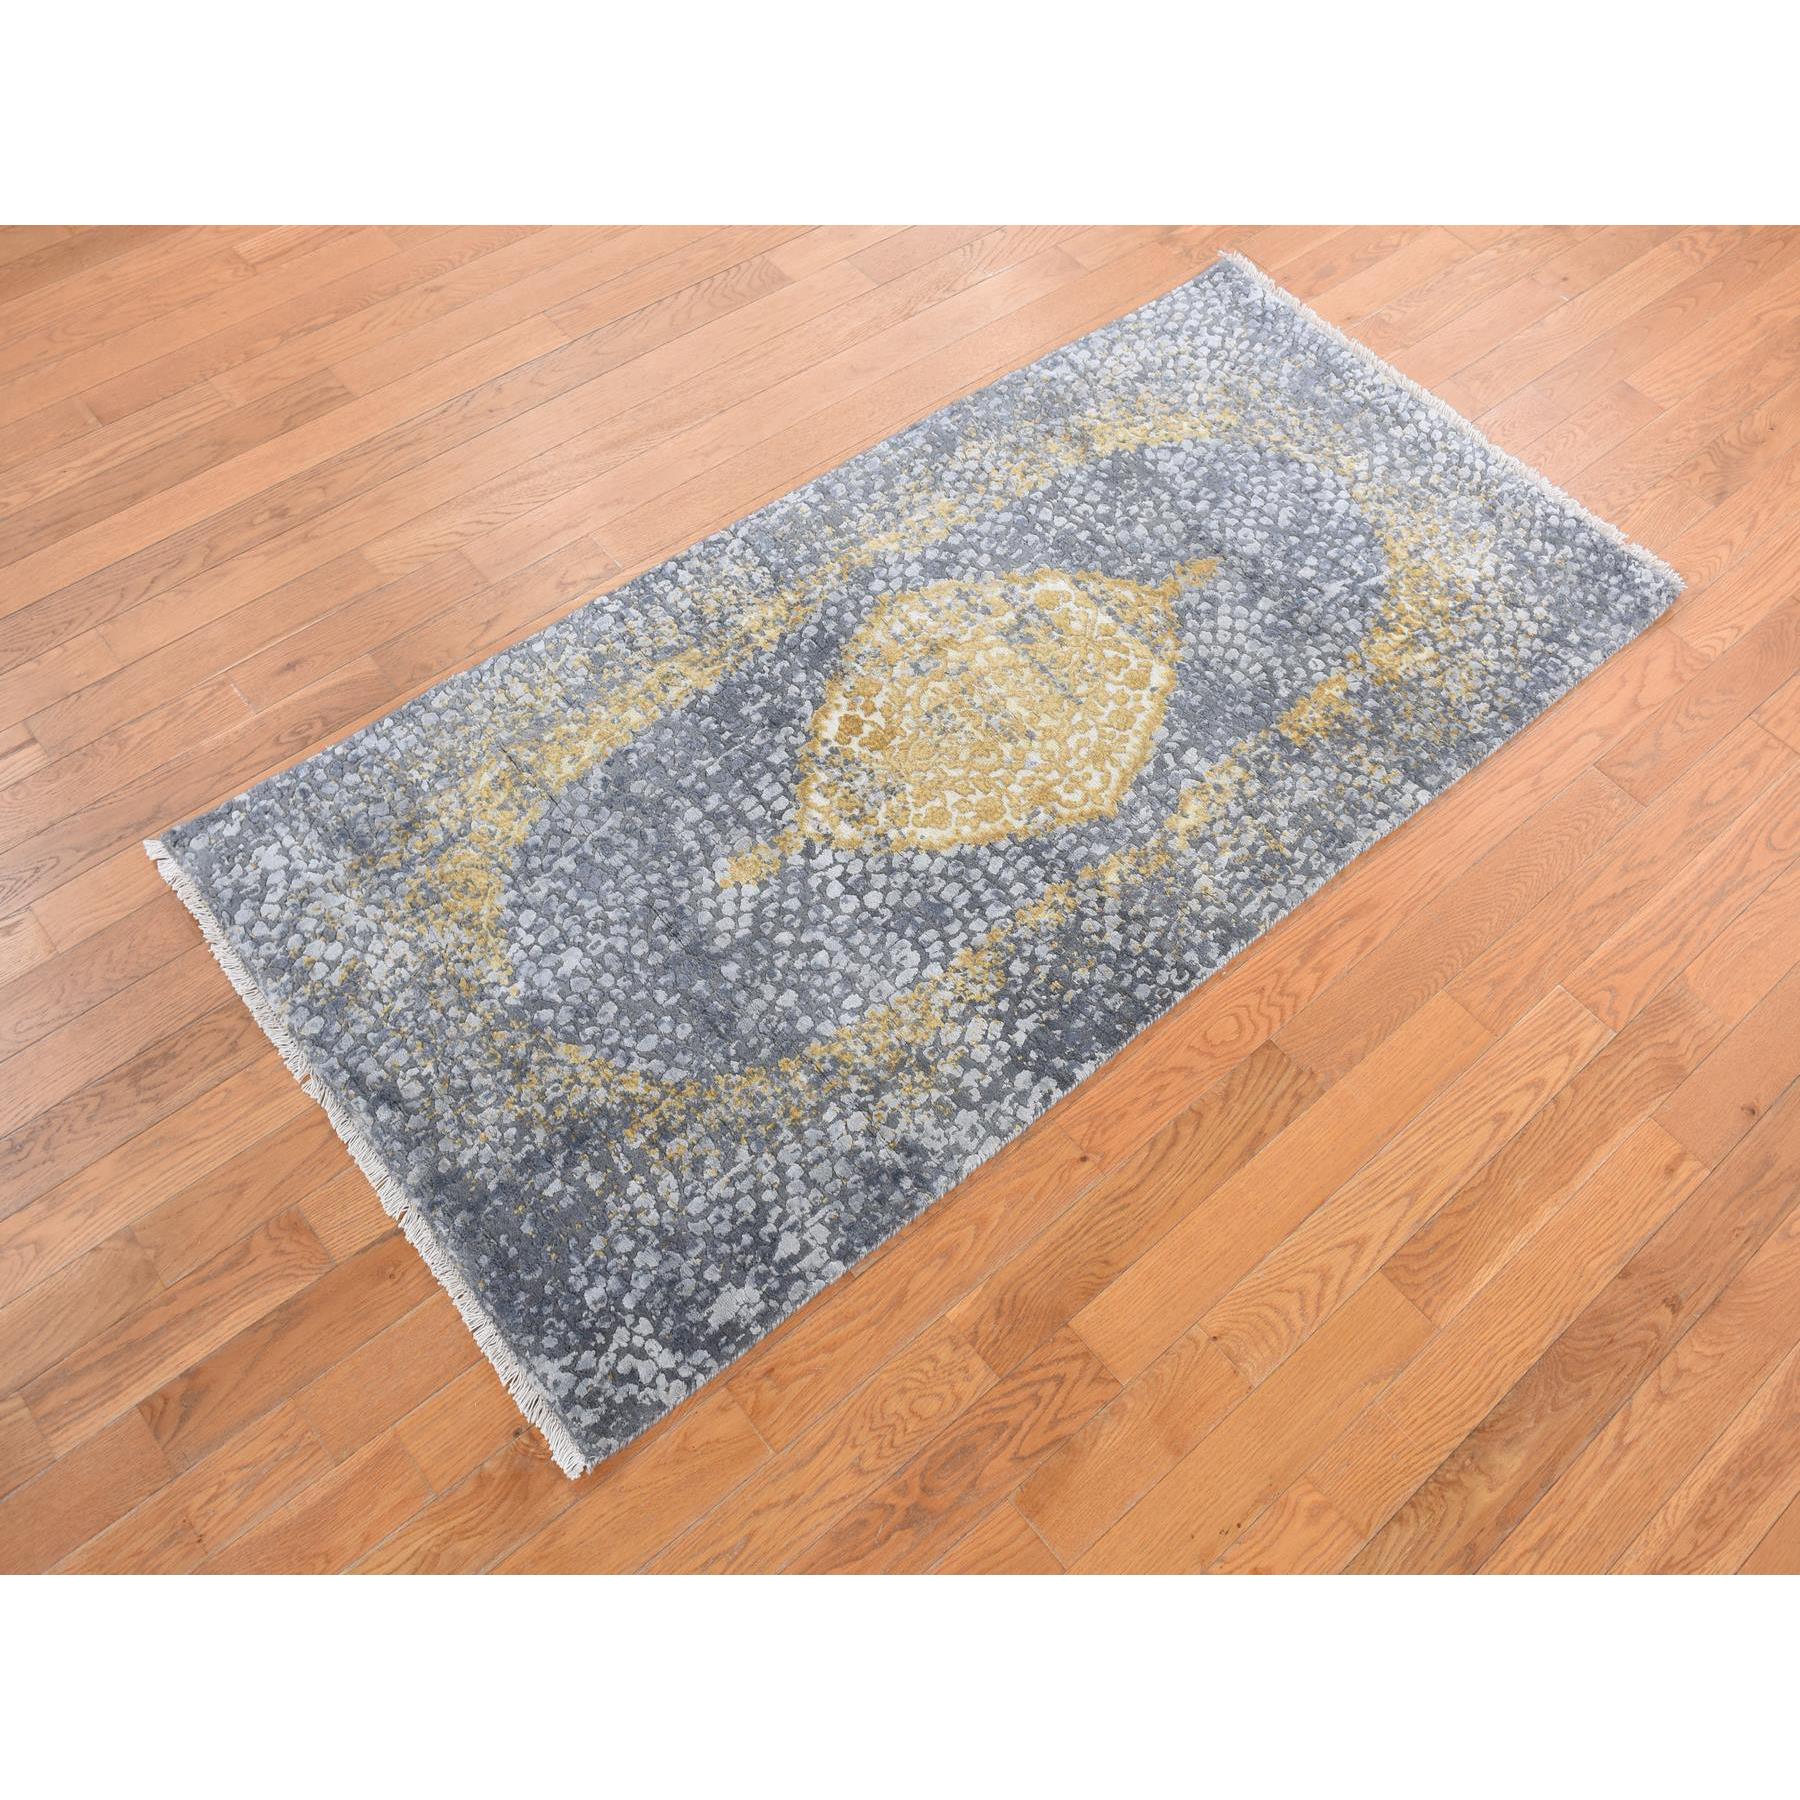  Silk Hand-Knotted Area Rug 2'10